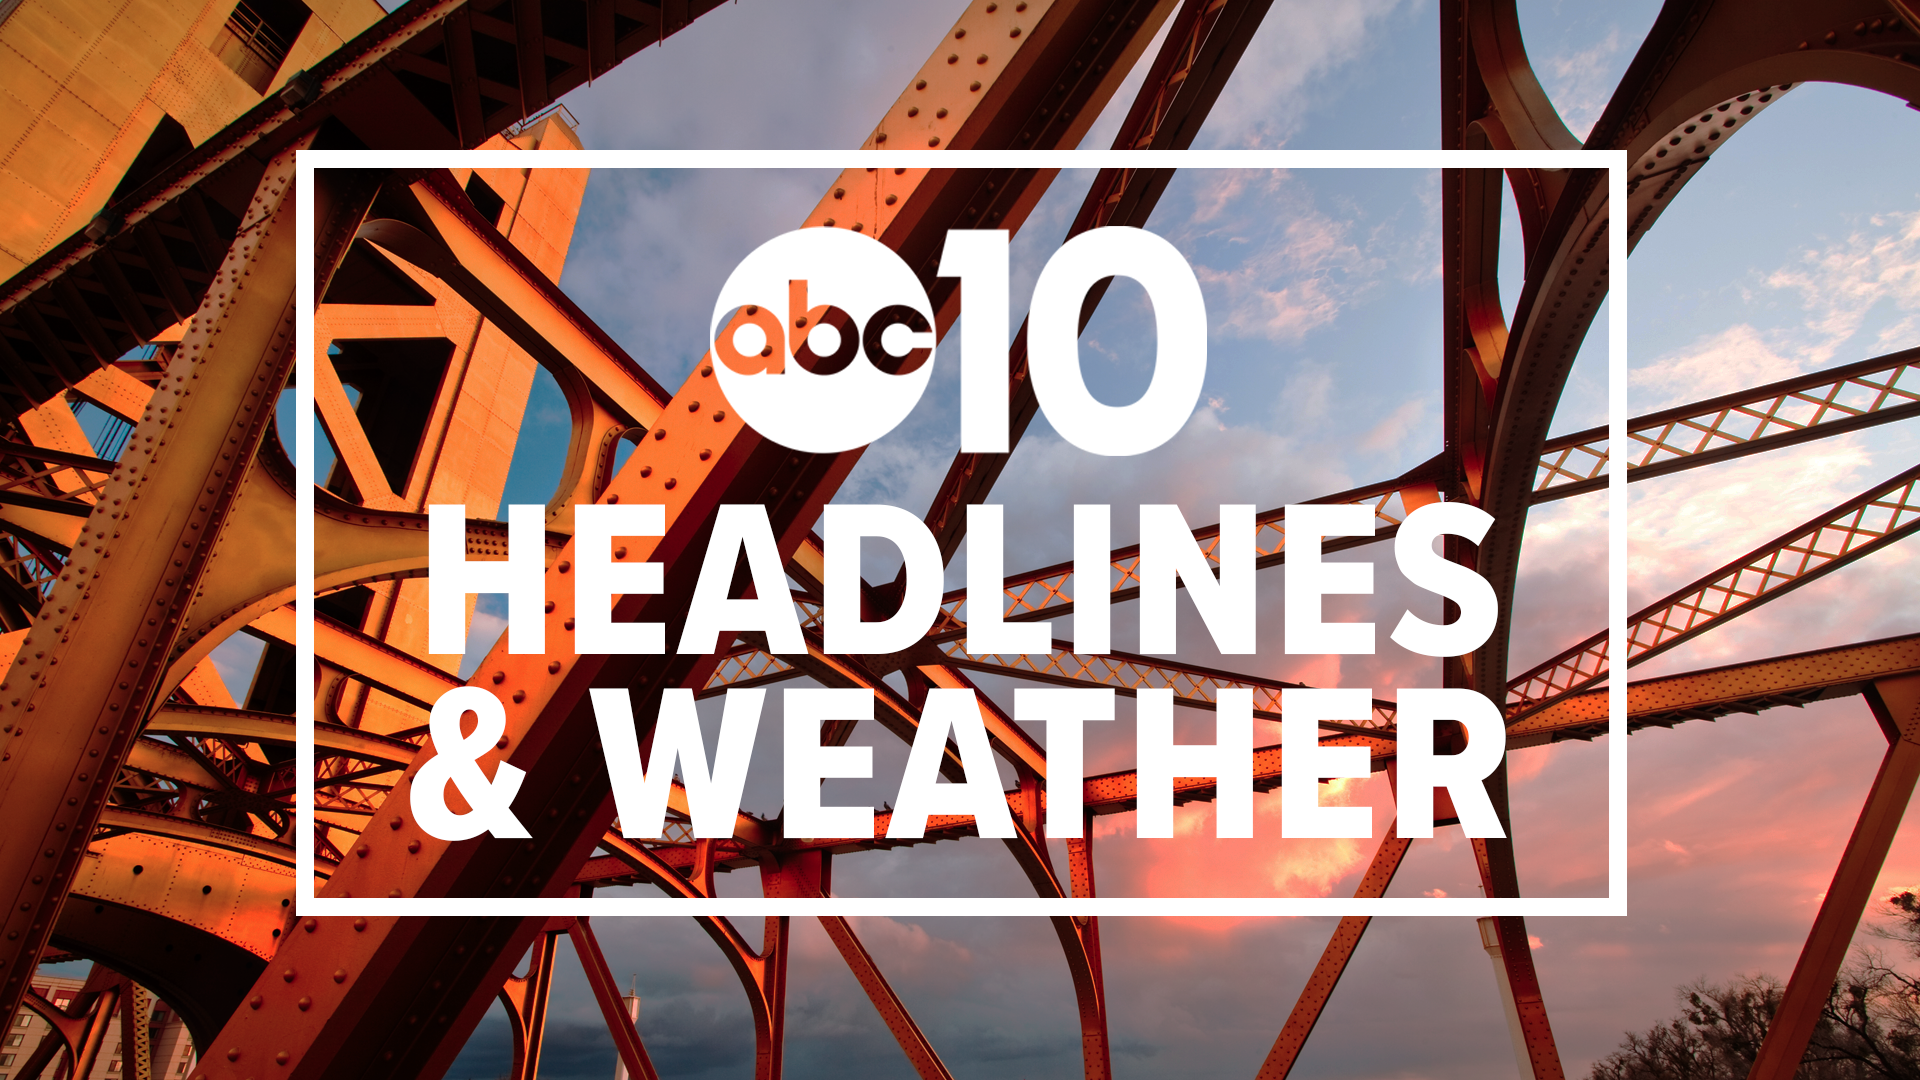 Evening Headlines: January 2, 2020 | Catch in-depth reporting on #LateNewsTonight at 11 p.m. | The latest Sacramento news is always at www.abc10.com